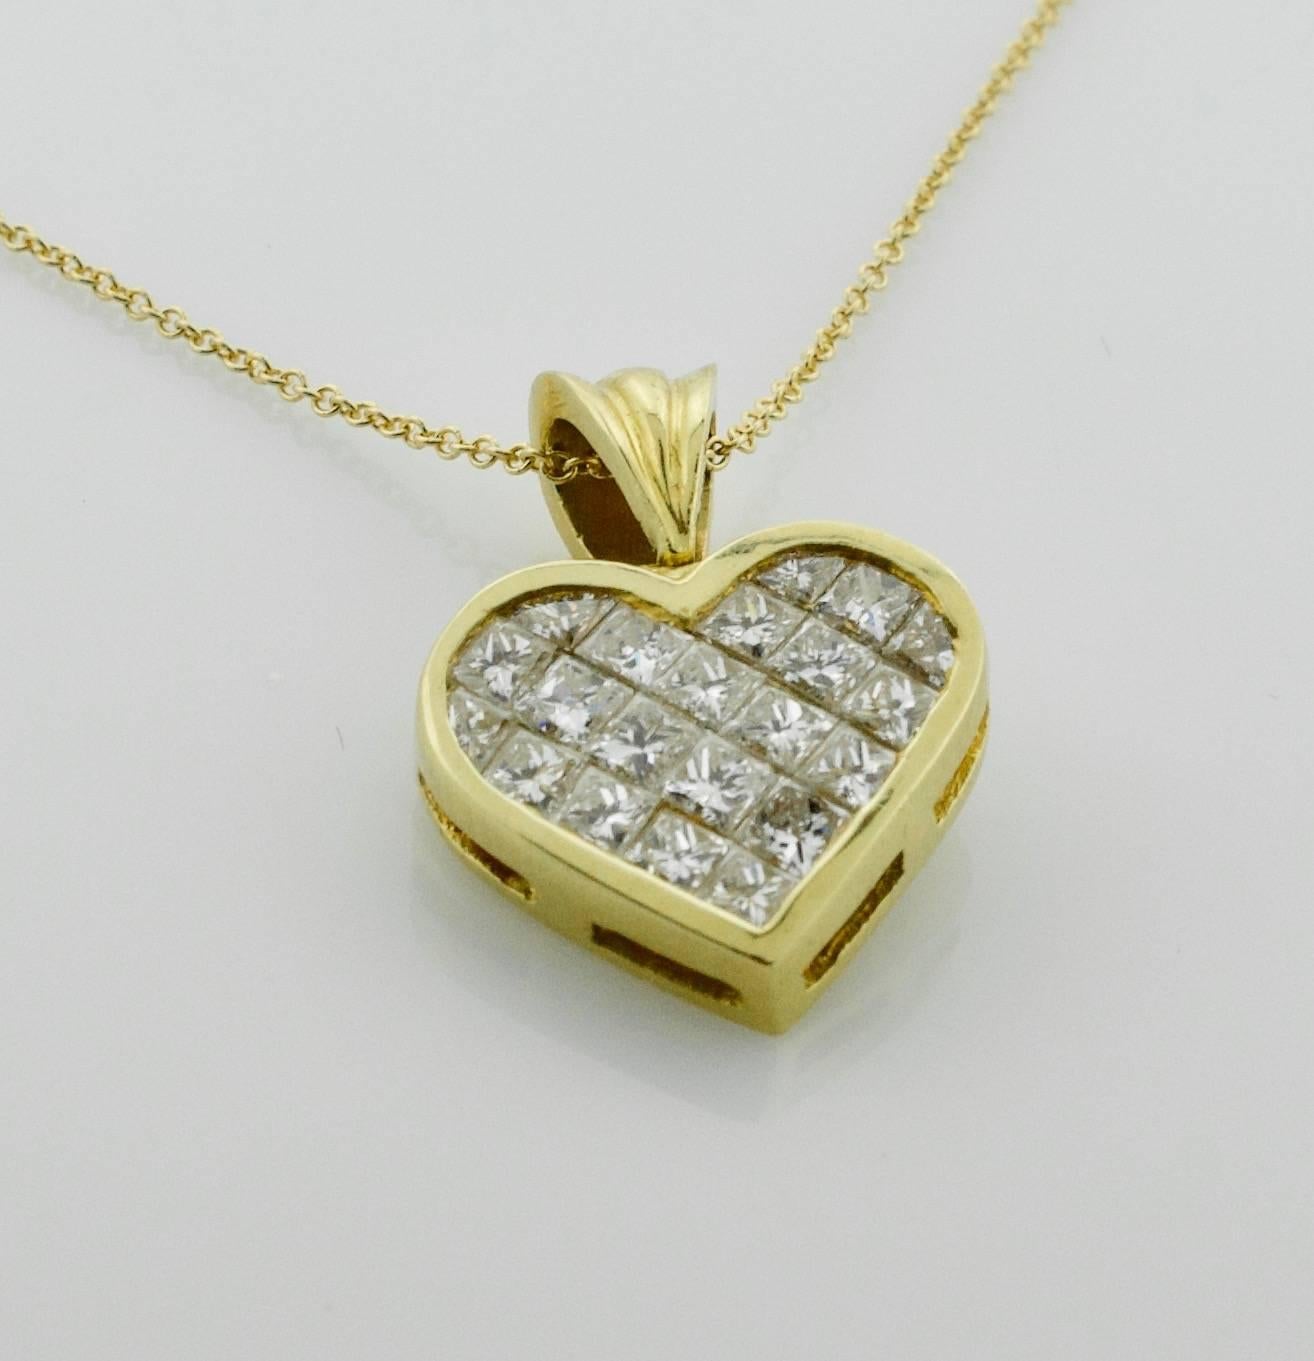 Invisibly Set Diamond Heart in 18k Yellow Gold 2.25 carats. 
Twenty One Princess and Fancy Cut Diamonds weighing 2.25 carats approximately
[fine quality GH VVS-VS]
on a 18k 18